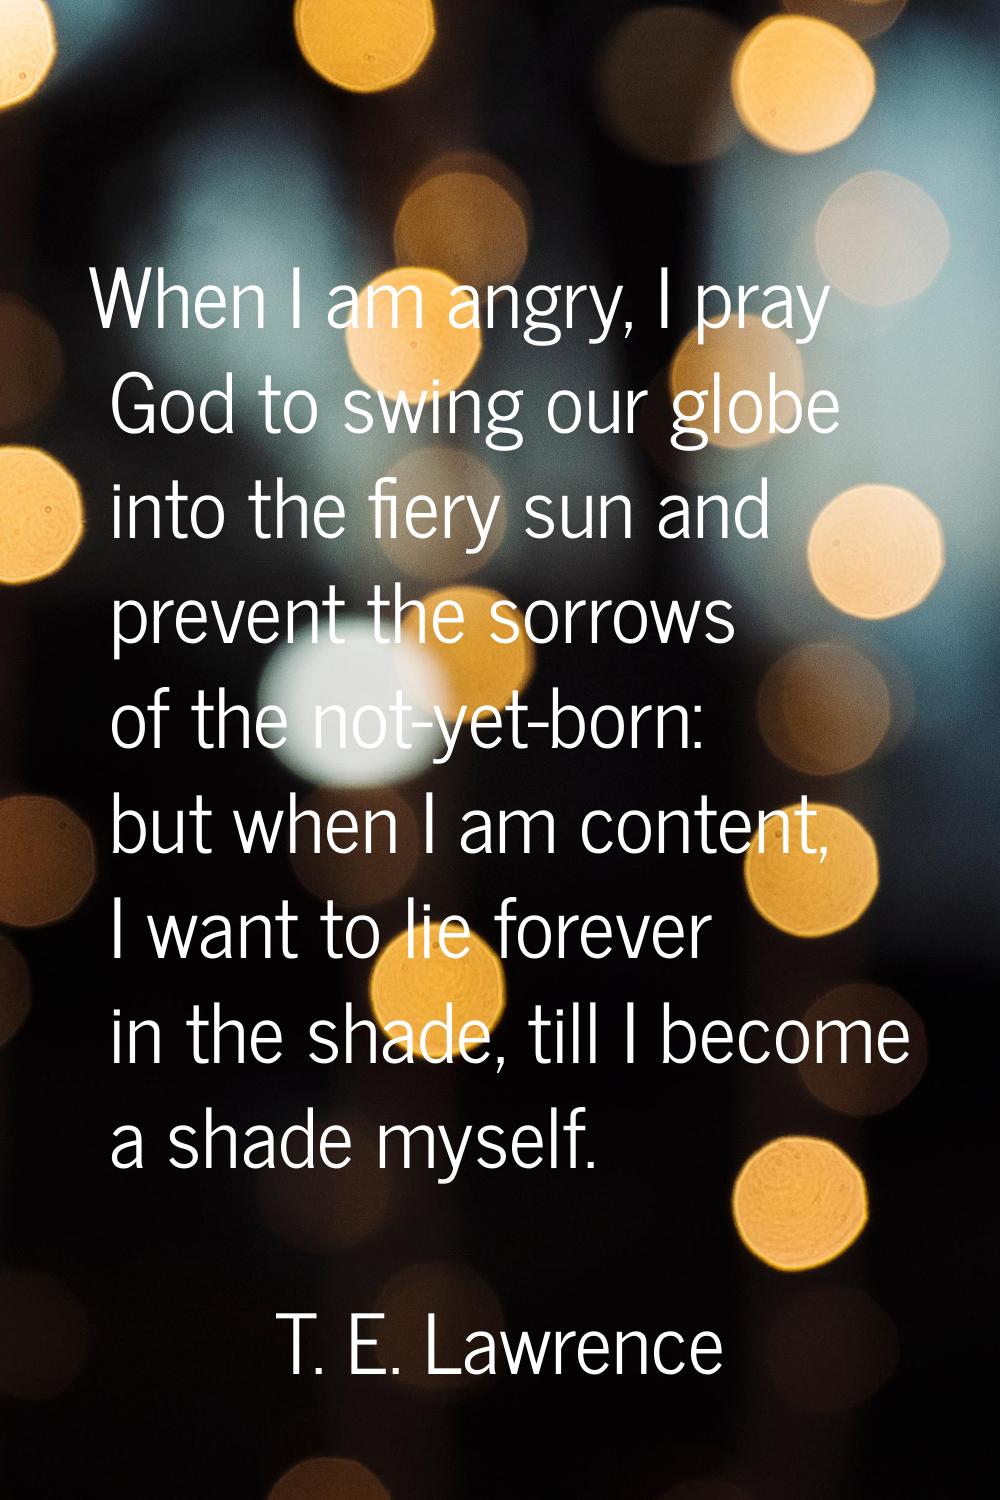 When I am angry, I pray God to swing our globe into the fiery sun and prevent the sorrows of the no